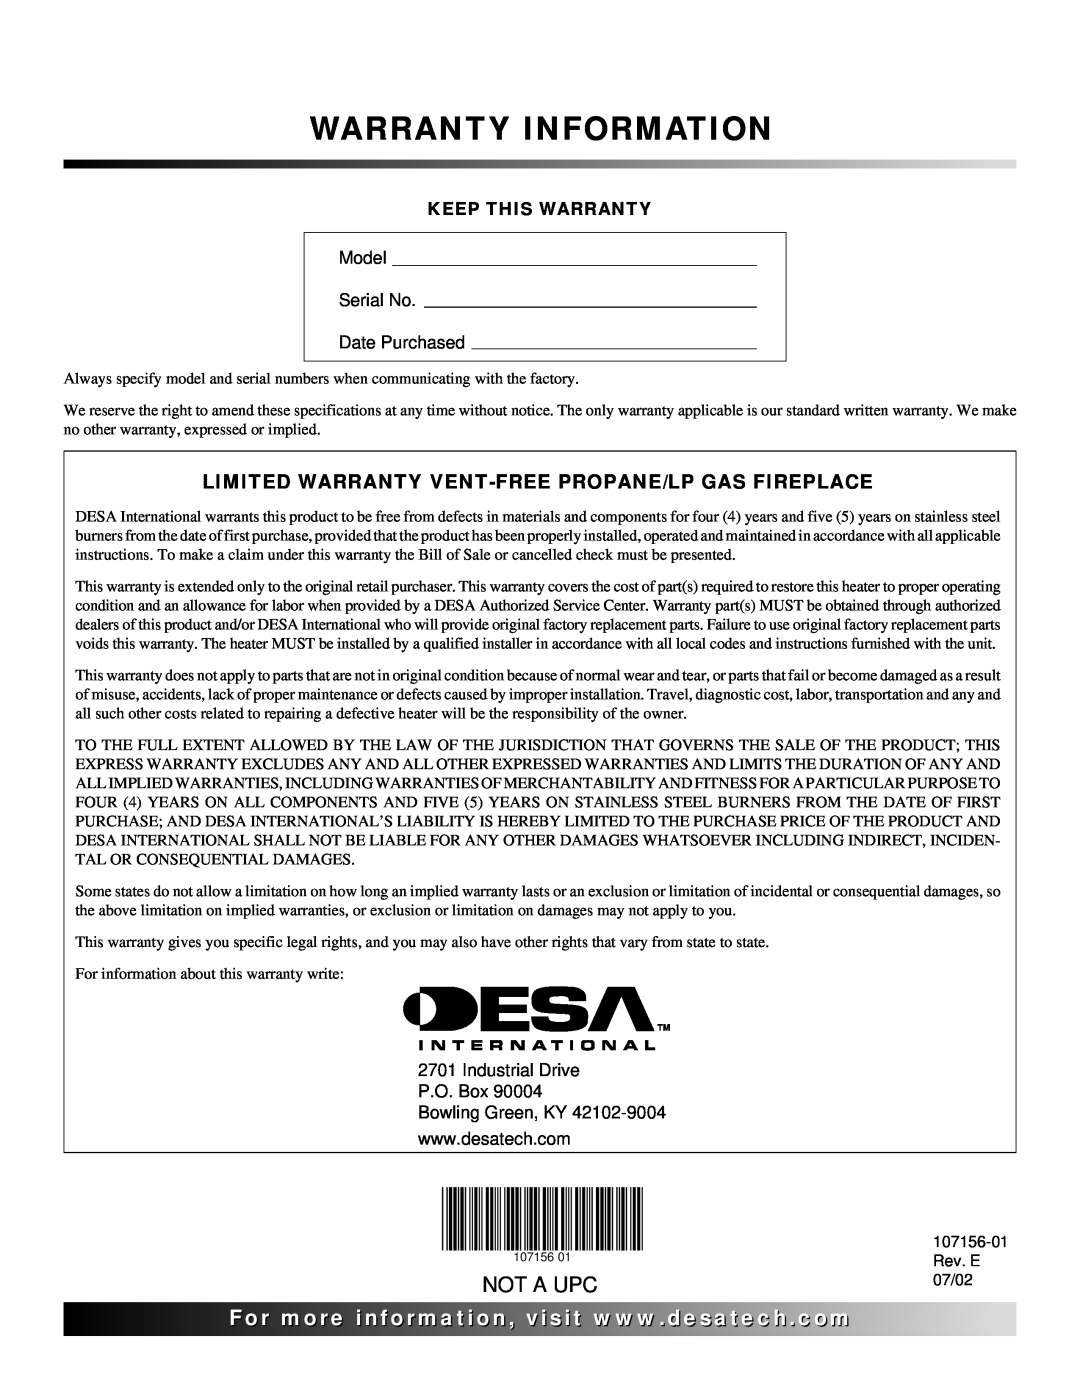 Vanguard Heating 107156-01E.pdf installation manual Warranty Information, Not A Upc, Model Serial No Date Purchased 